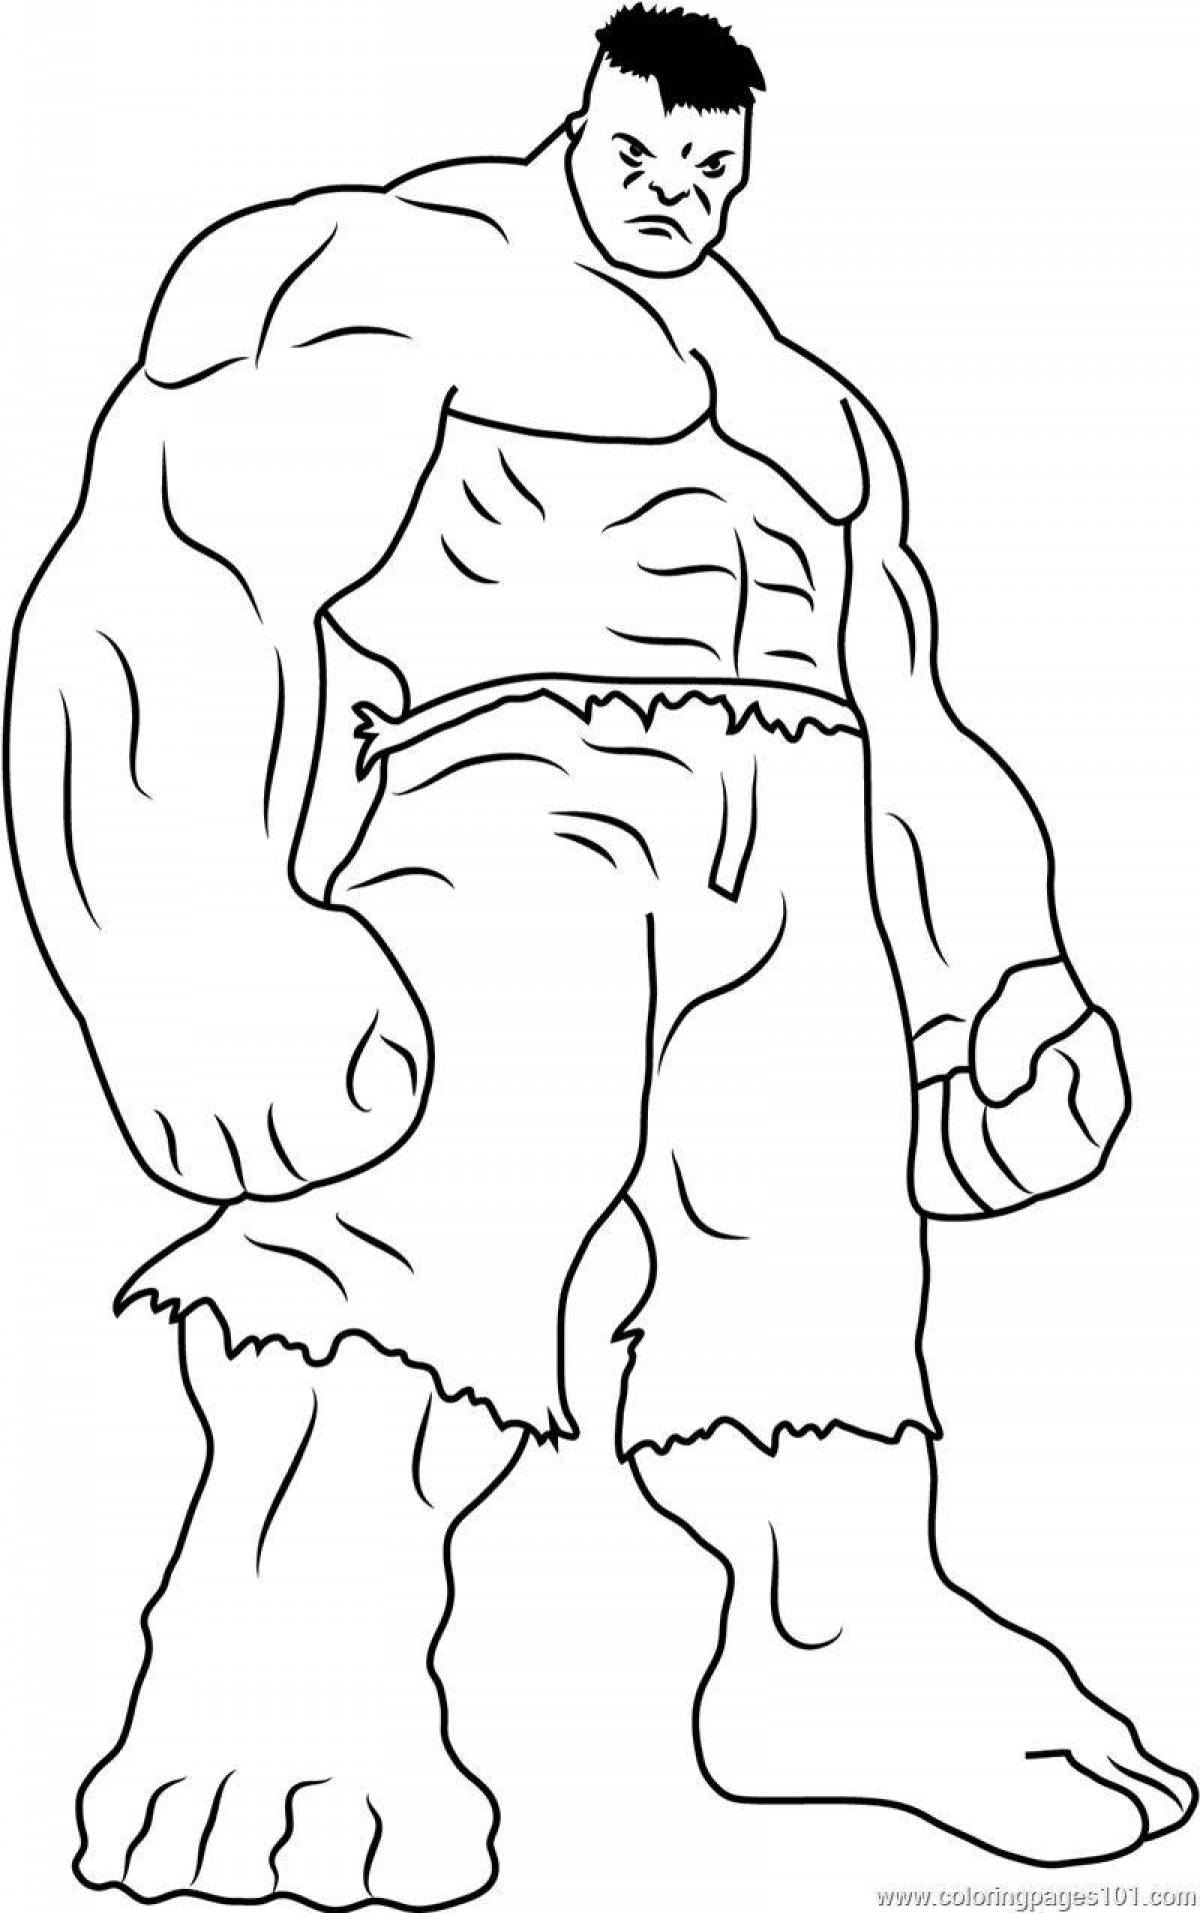 Adorable Hulk coloring book for 4-5 year olds